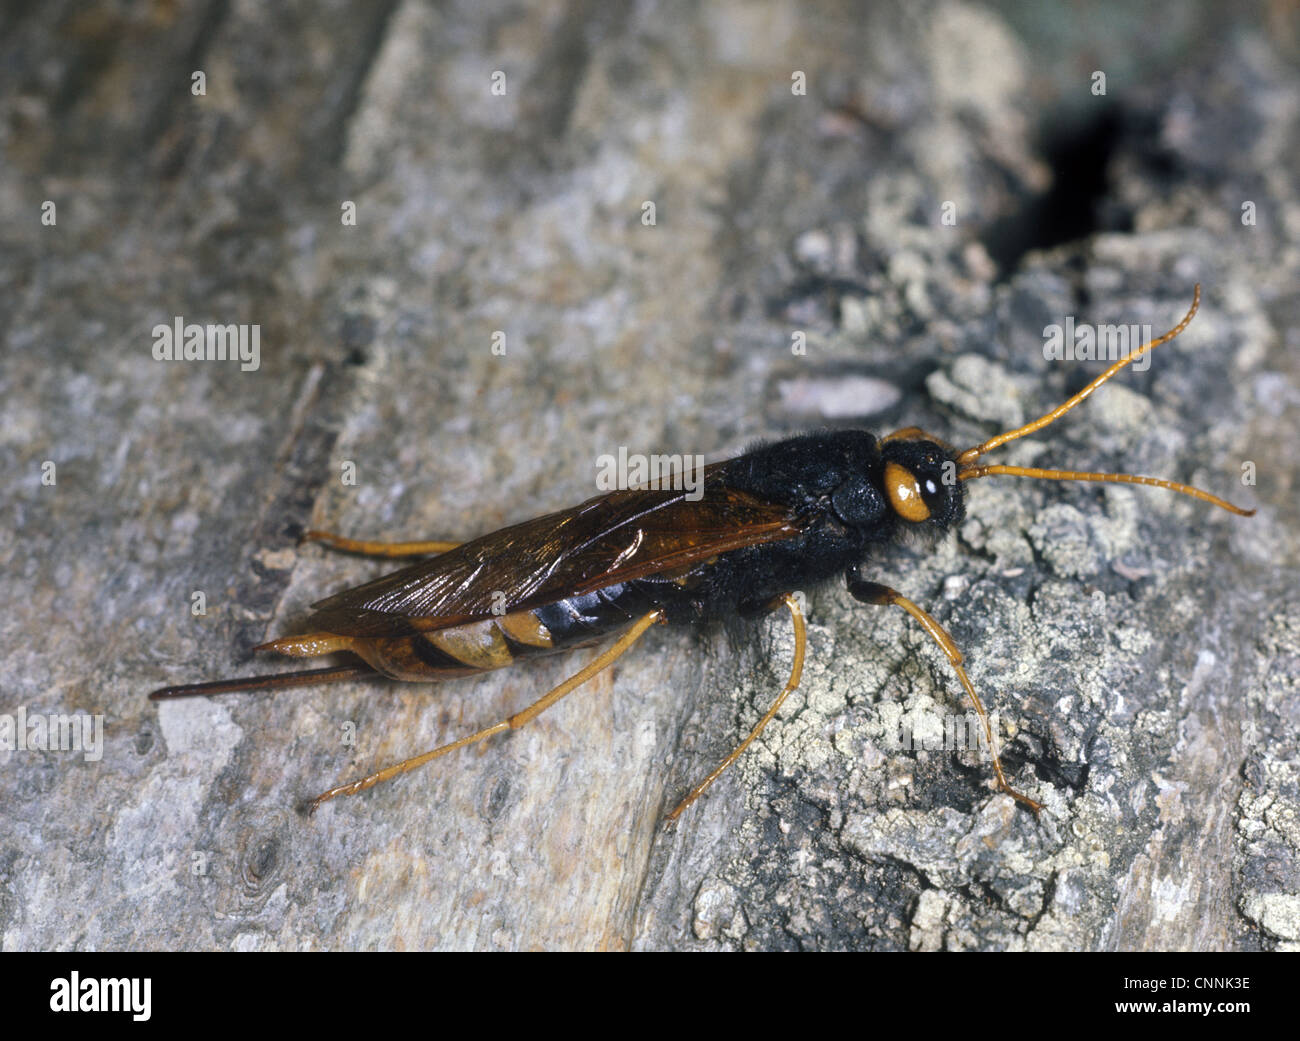 Greater Horntail or wood wasp- Sirex gigas Stock Photo